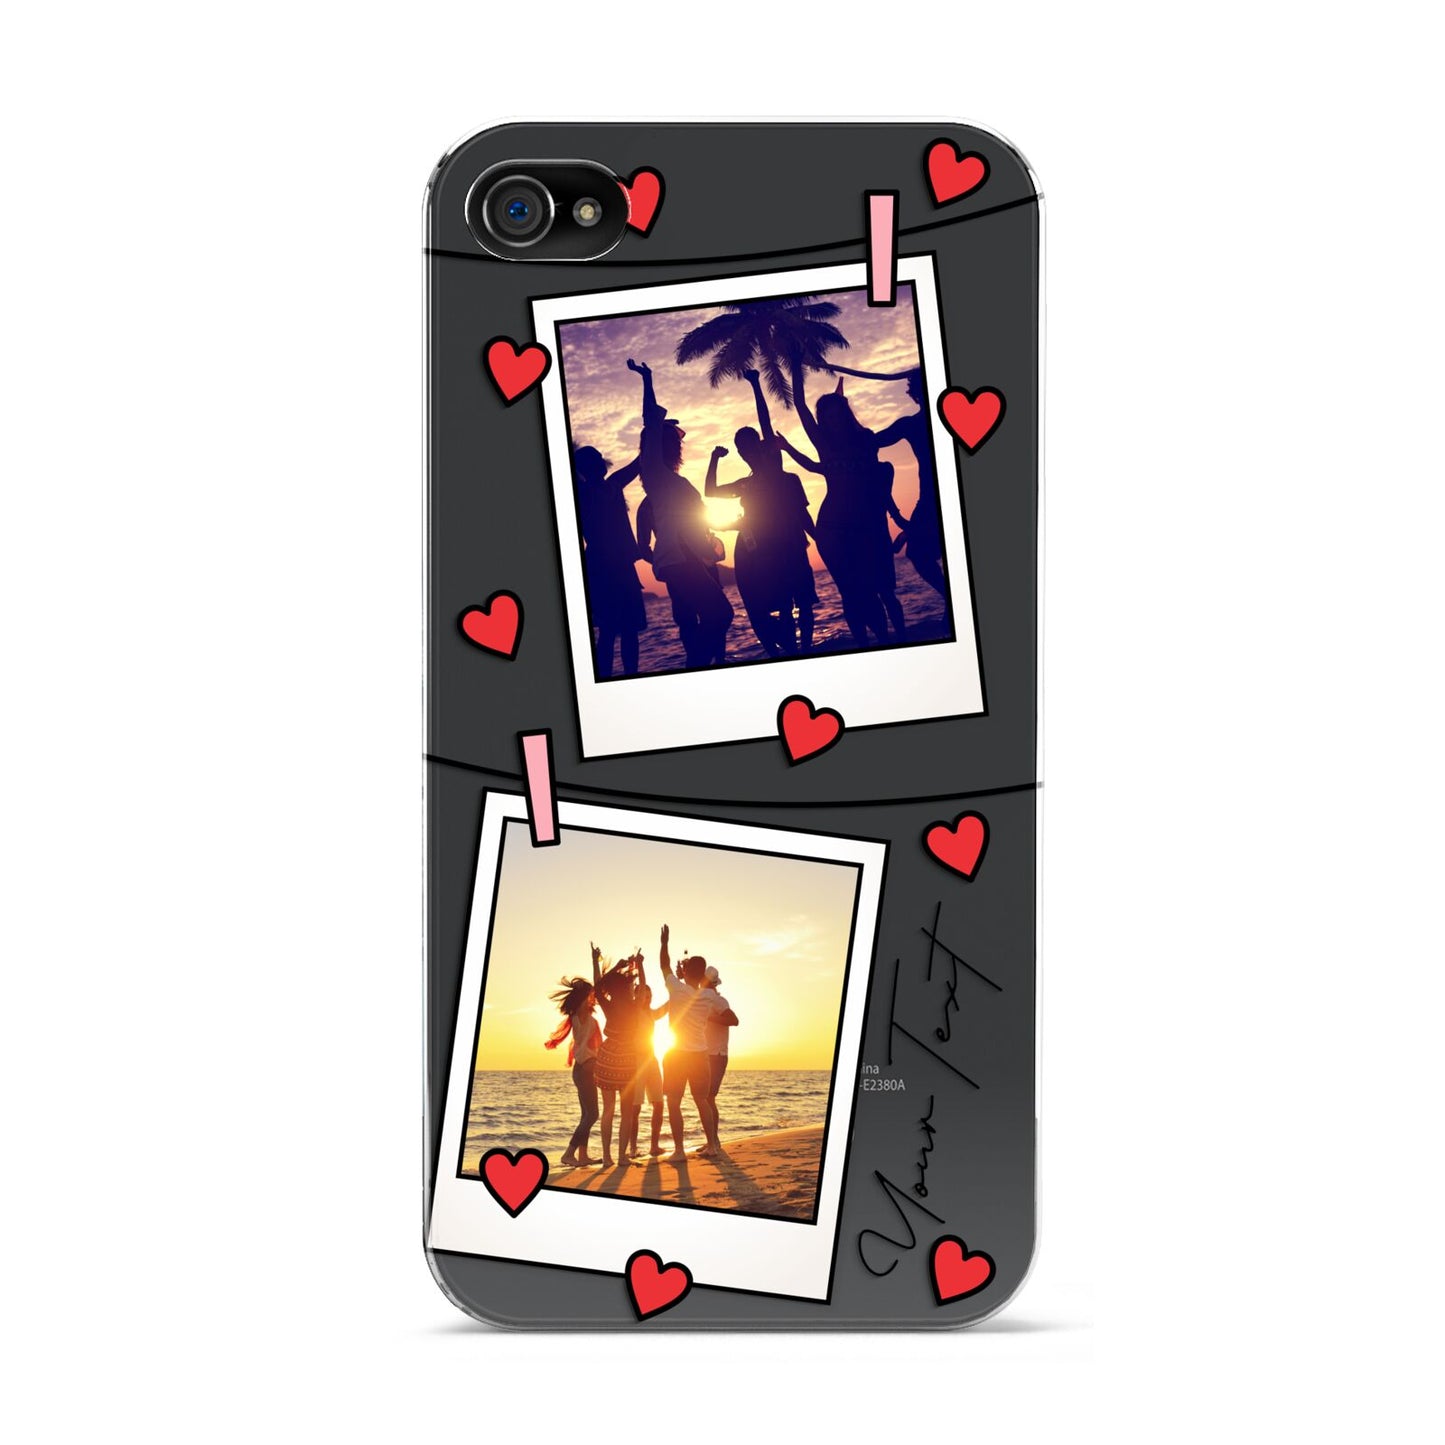 Hearts Photo Montage Upload with Text Apple iPhone 4s Case